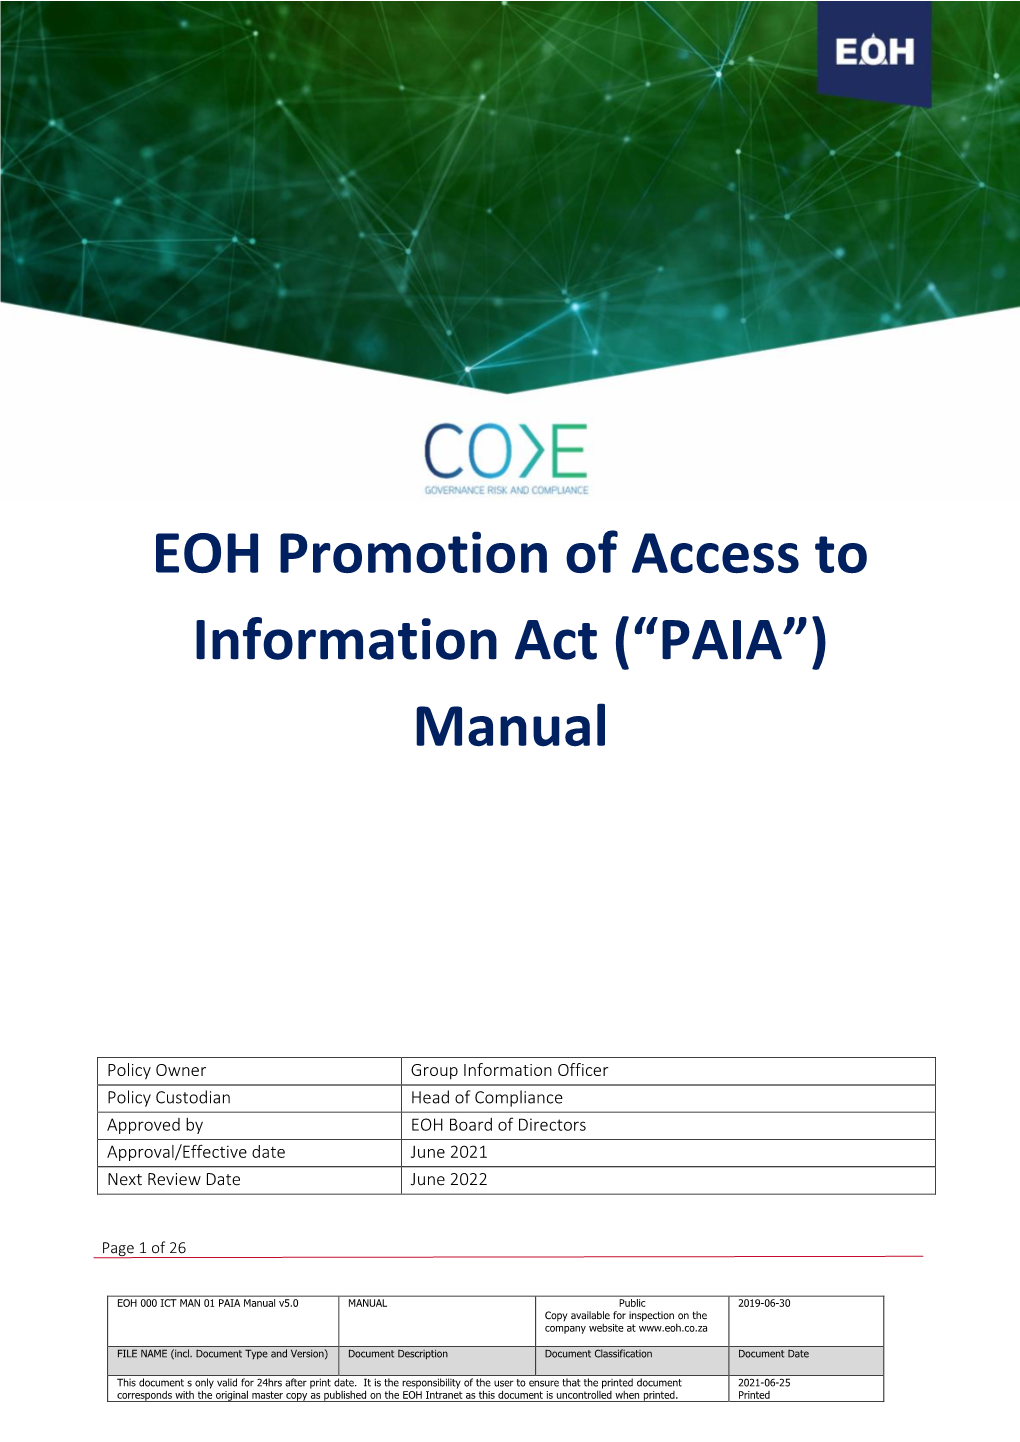 EOH Promotion of Access to Information Act (“PAIA”) Manual